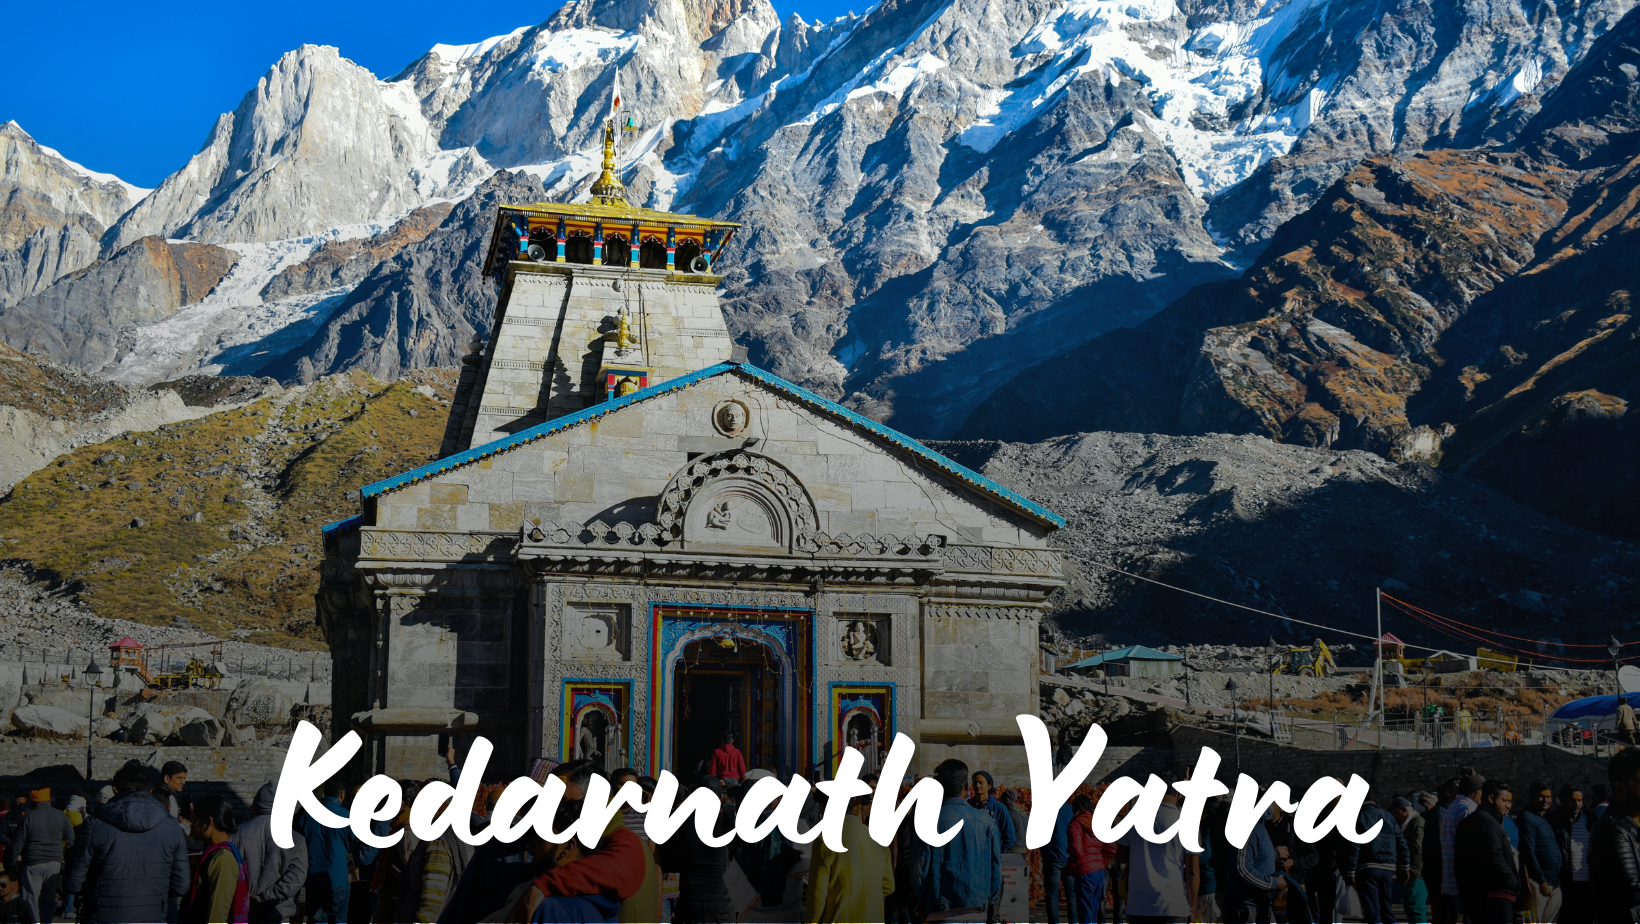 Kedarnath Yatra: A Complete Guide for Pilgrims and Adventurers